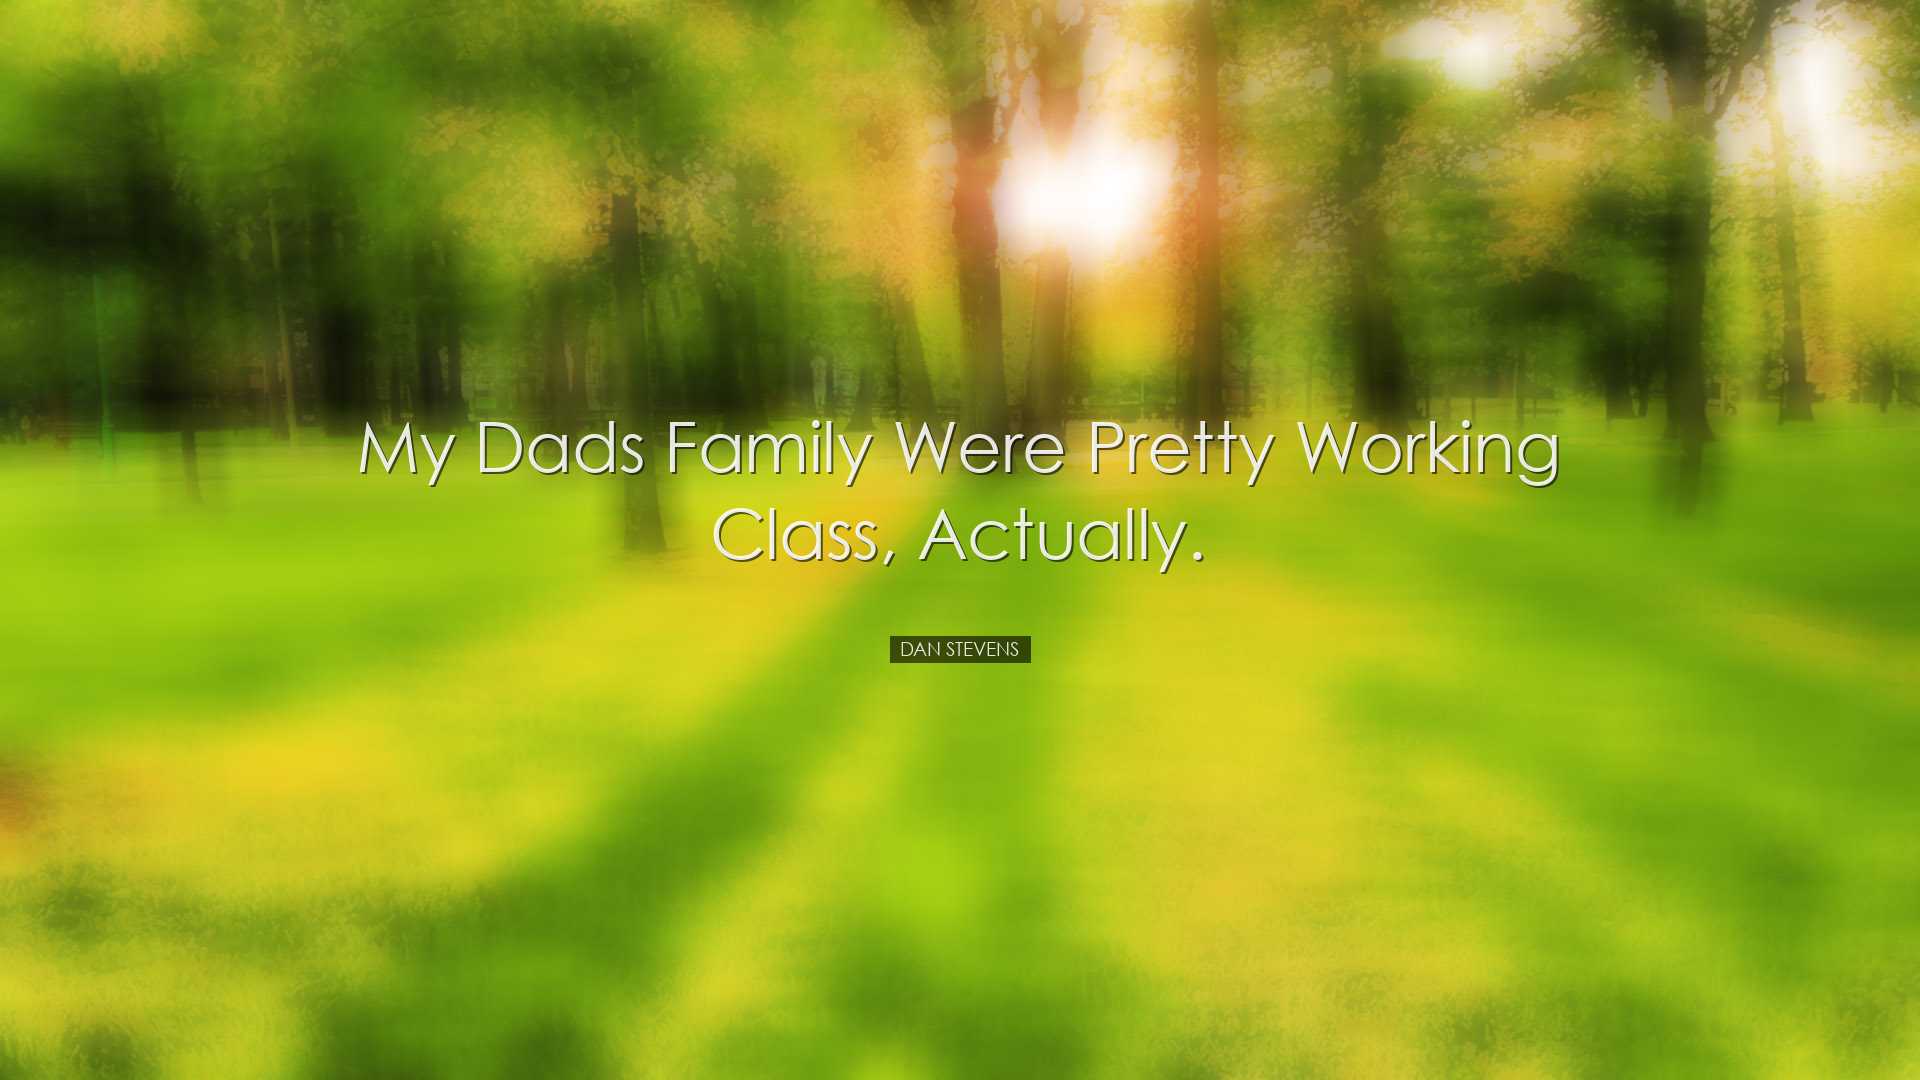 My dads family were pretty working class, actually. - Dan Stevens